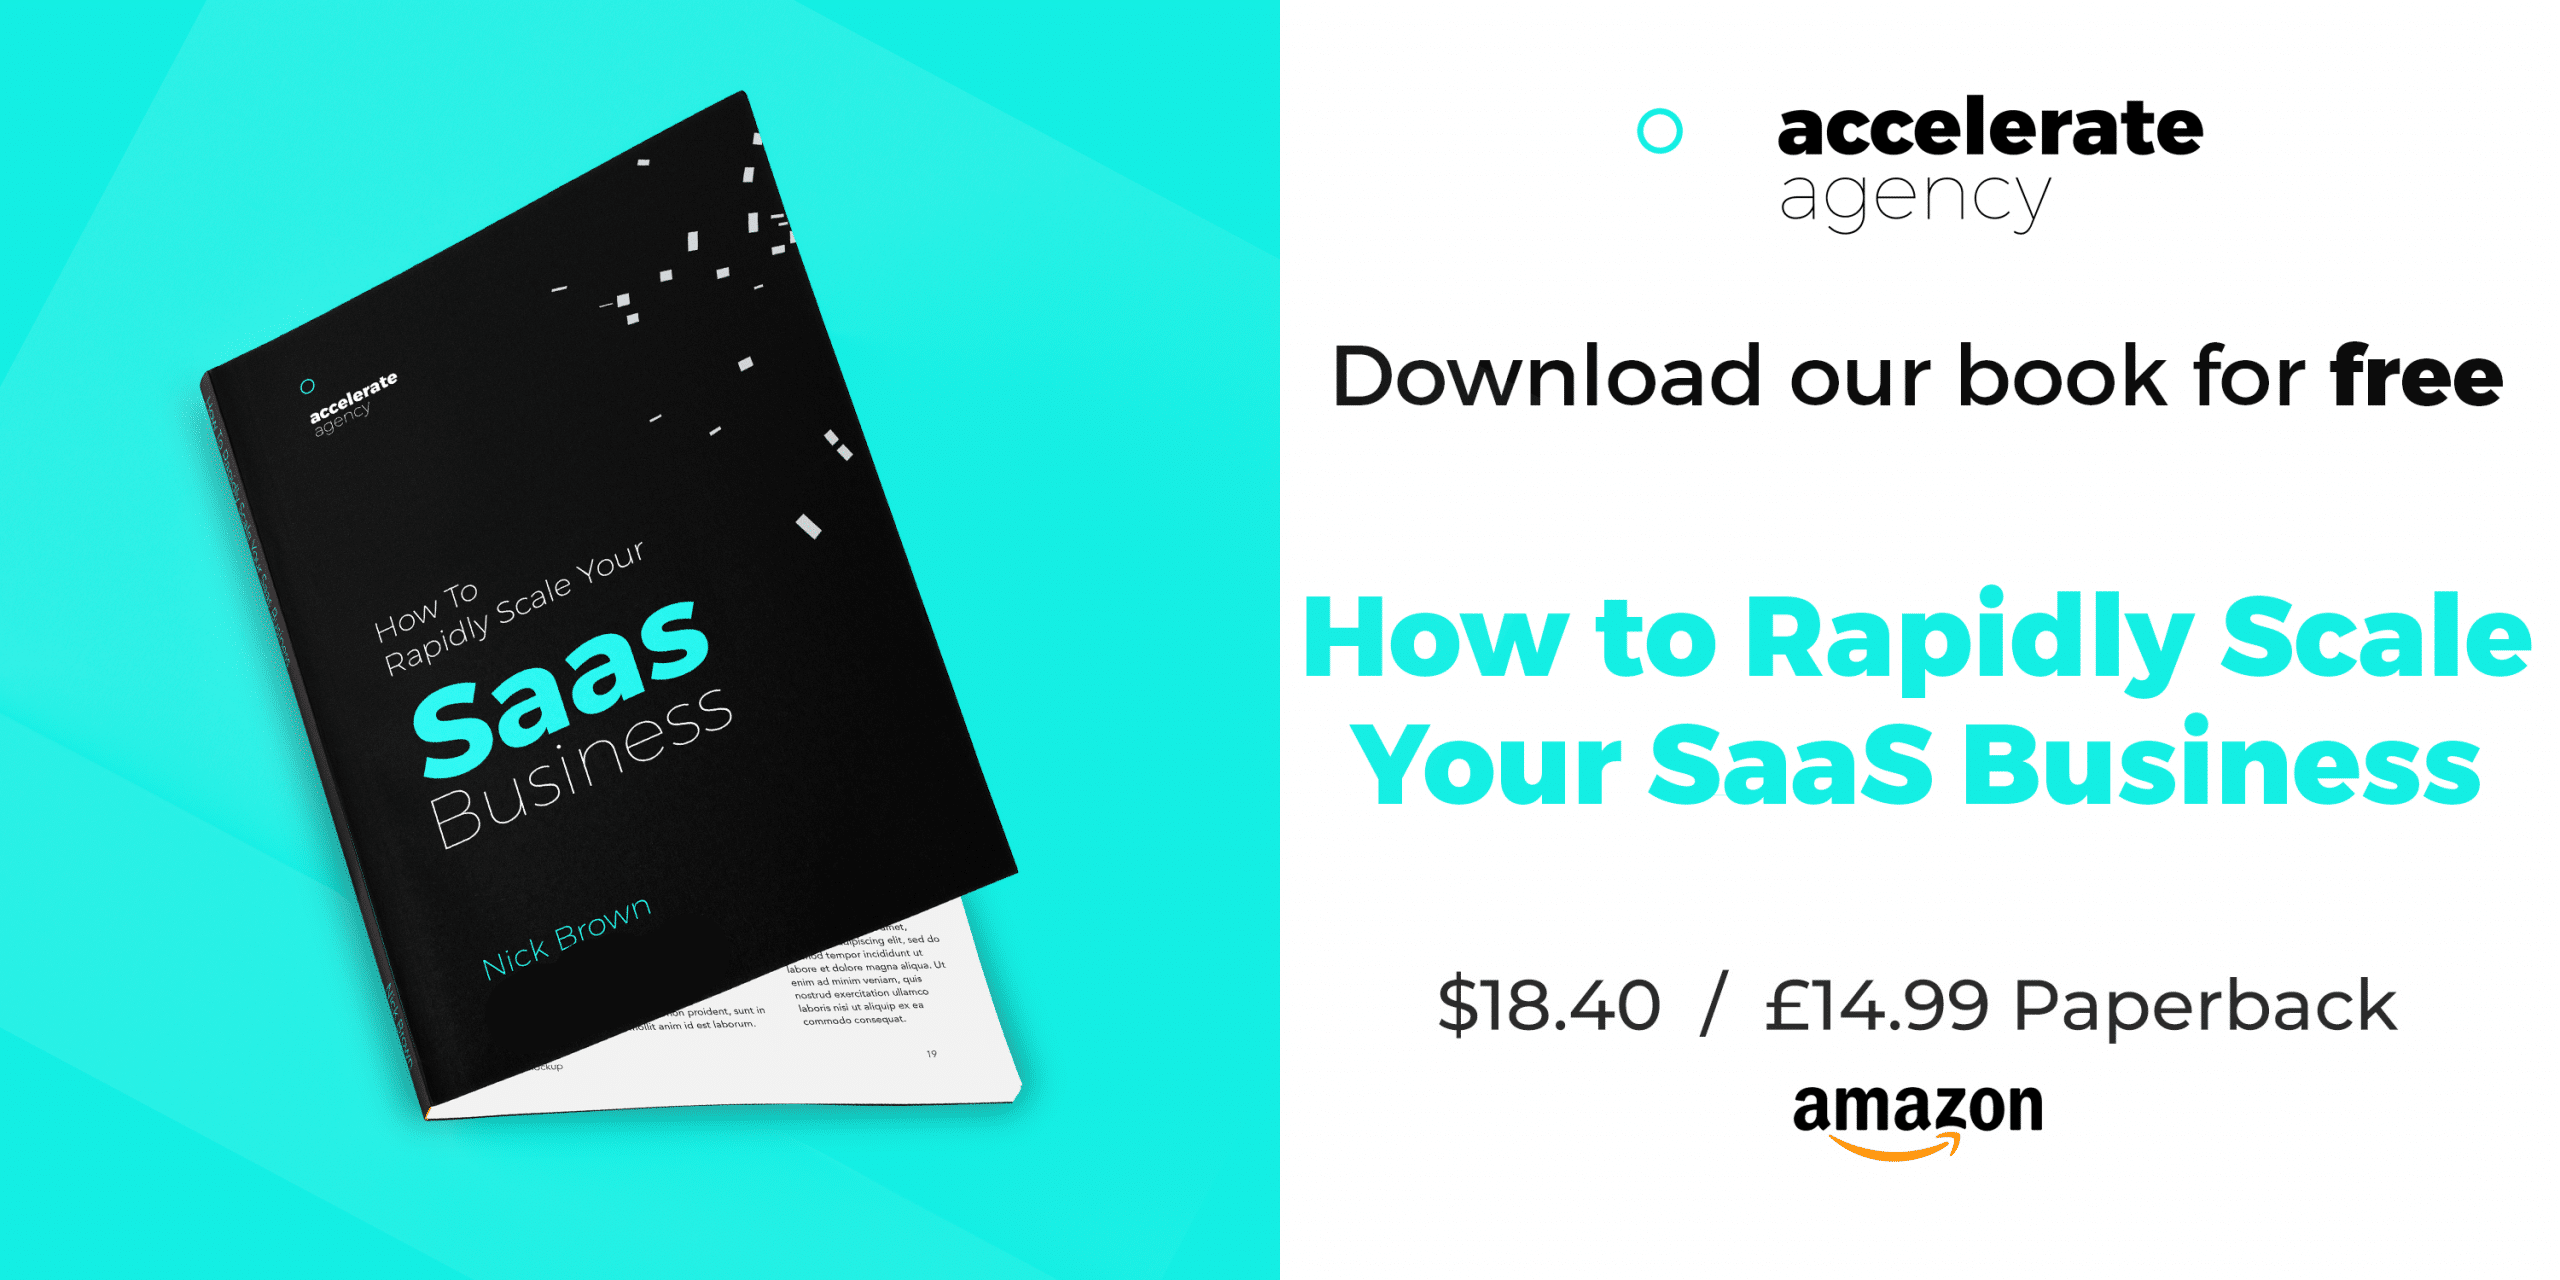 Free-ebook-how-to-rapidly-scale-your-business